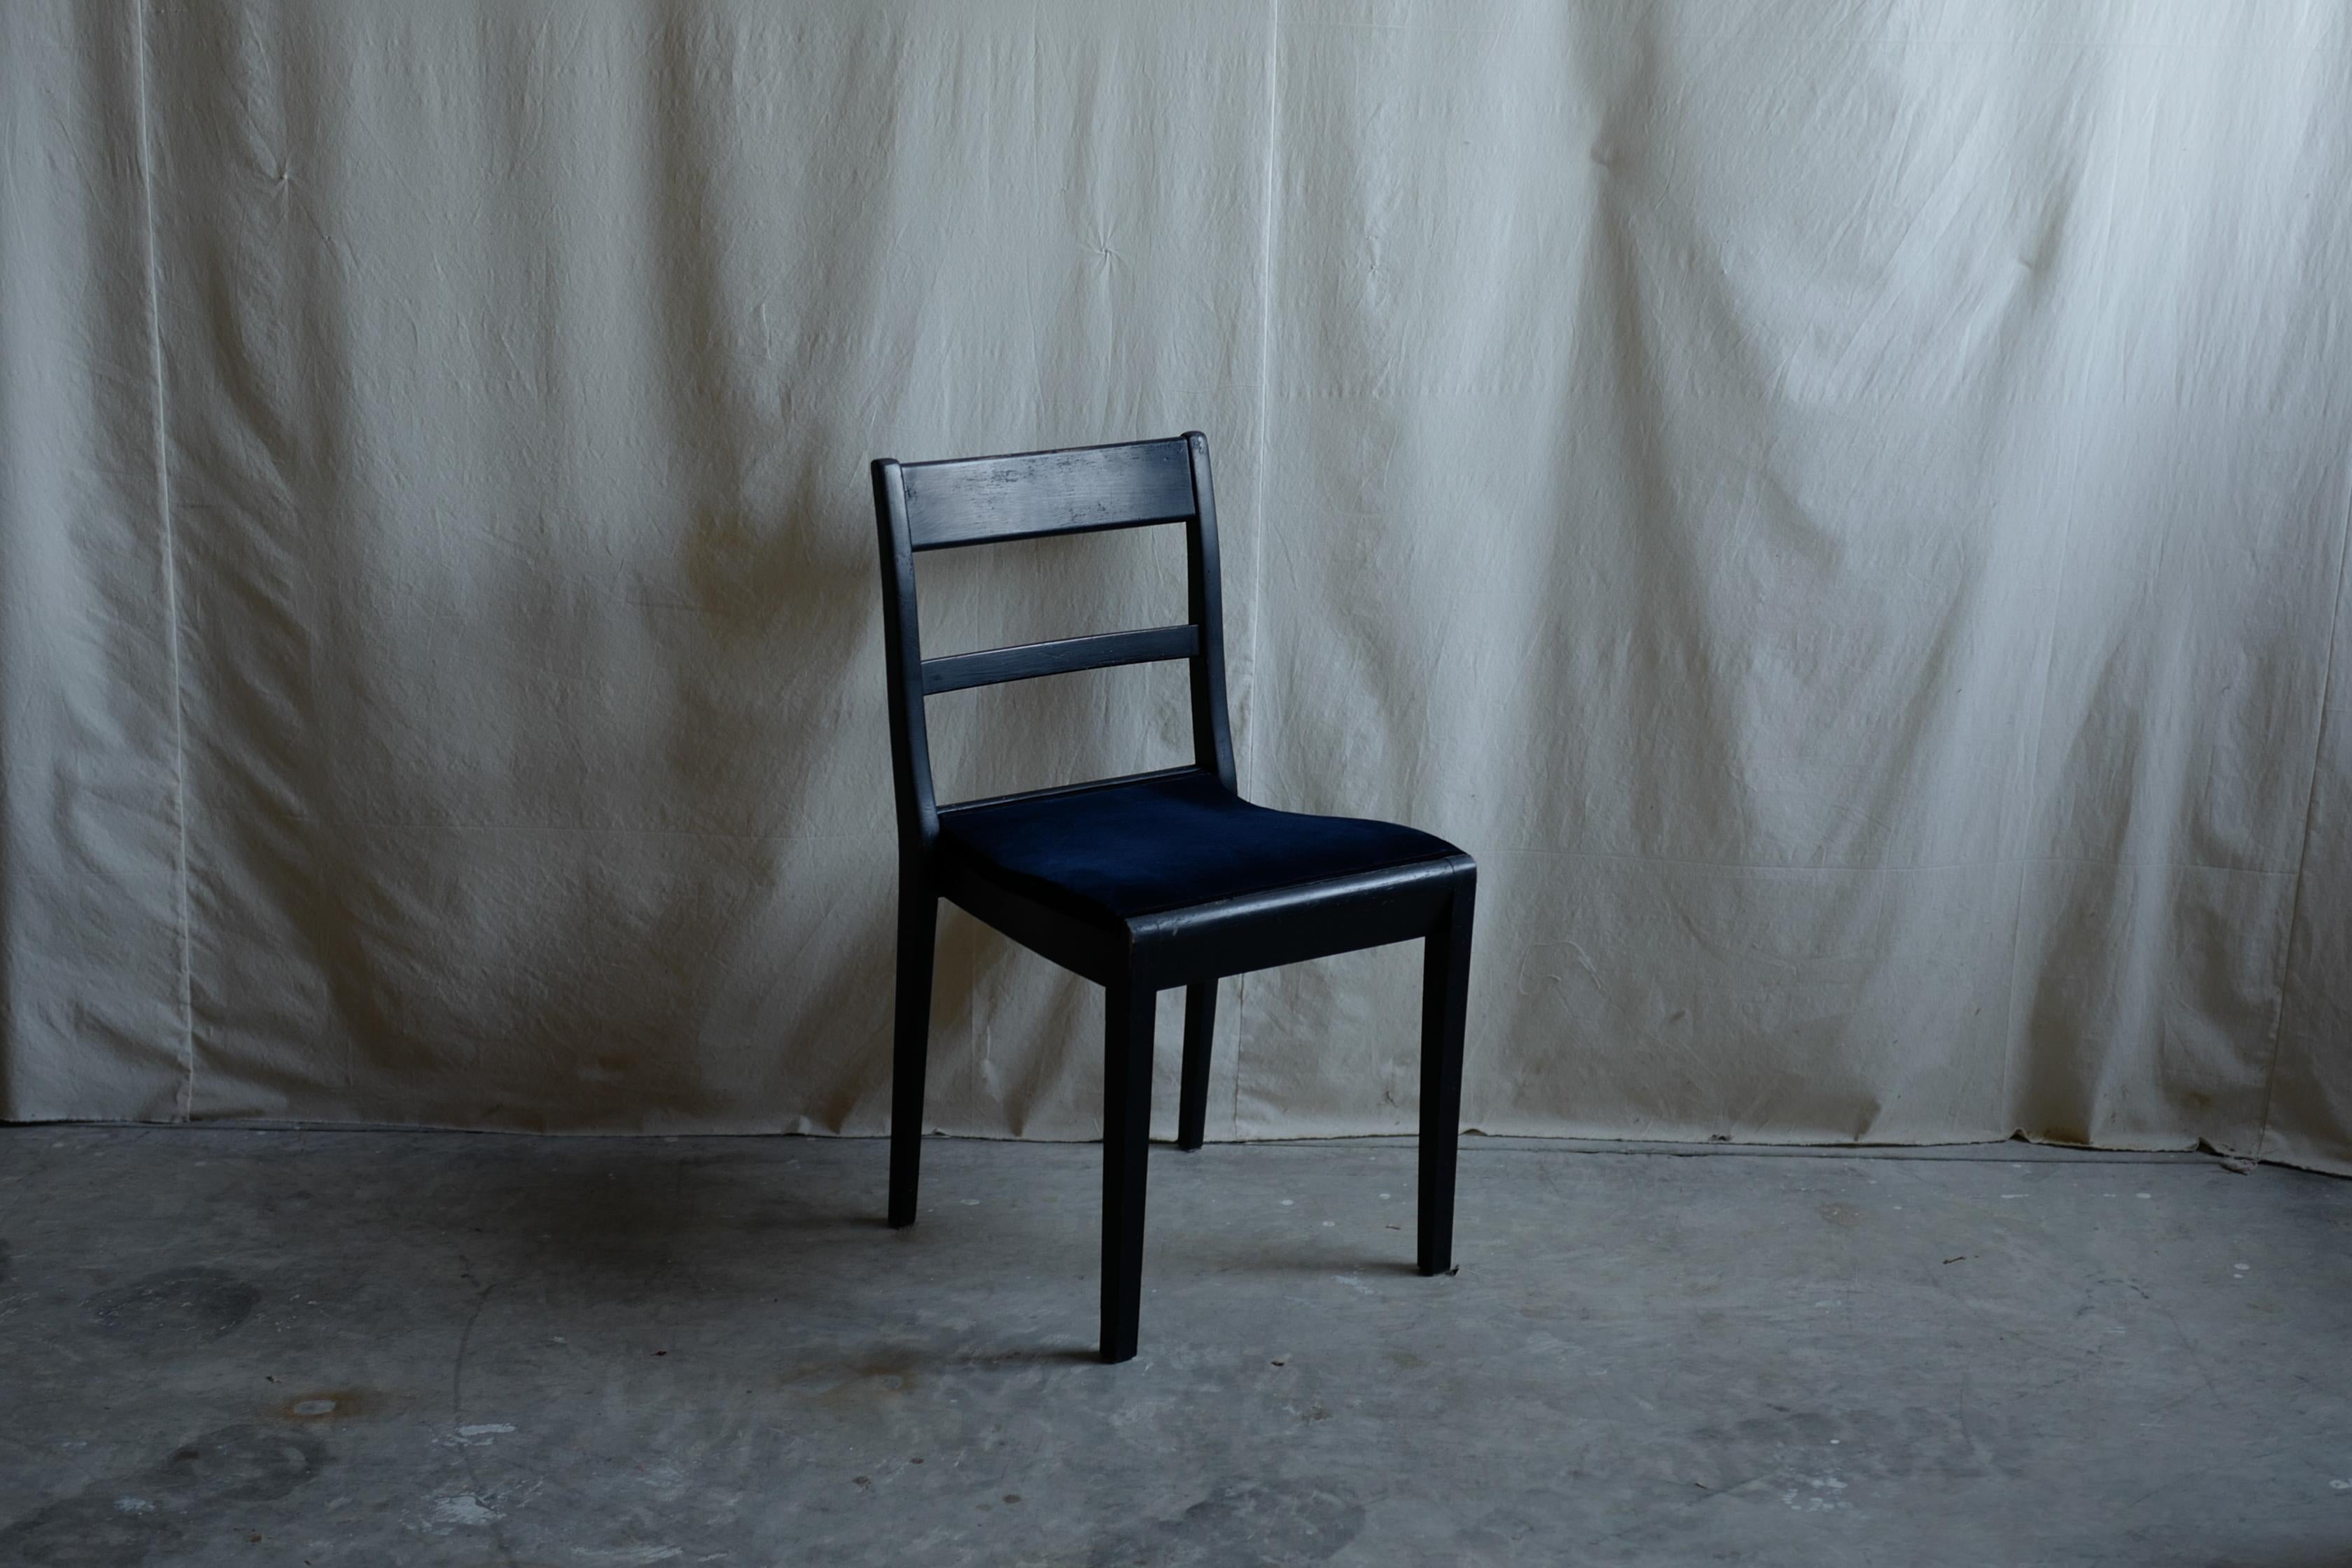 Chair deisgned otto korhonen as known as alvar aalto partner for founding artek.
Very rare and feel early modernism item form.
It is prototype for 611 chair by alvar aalto.
